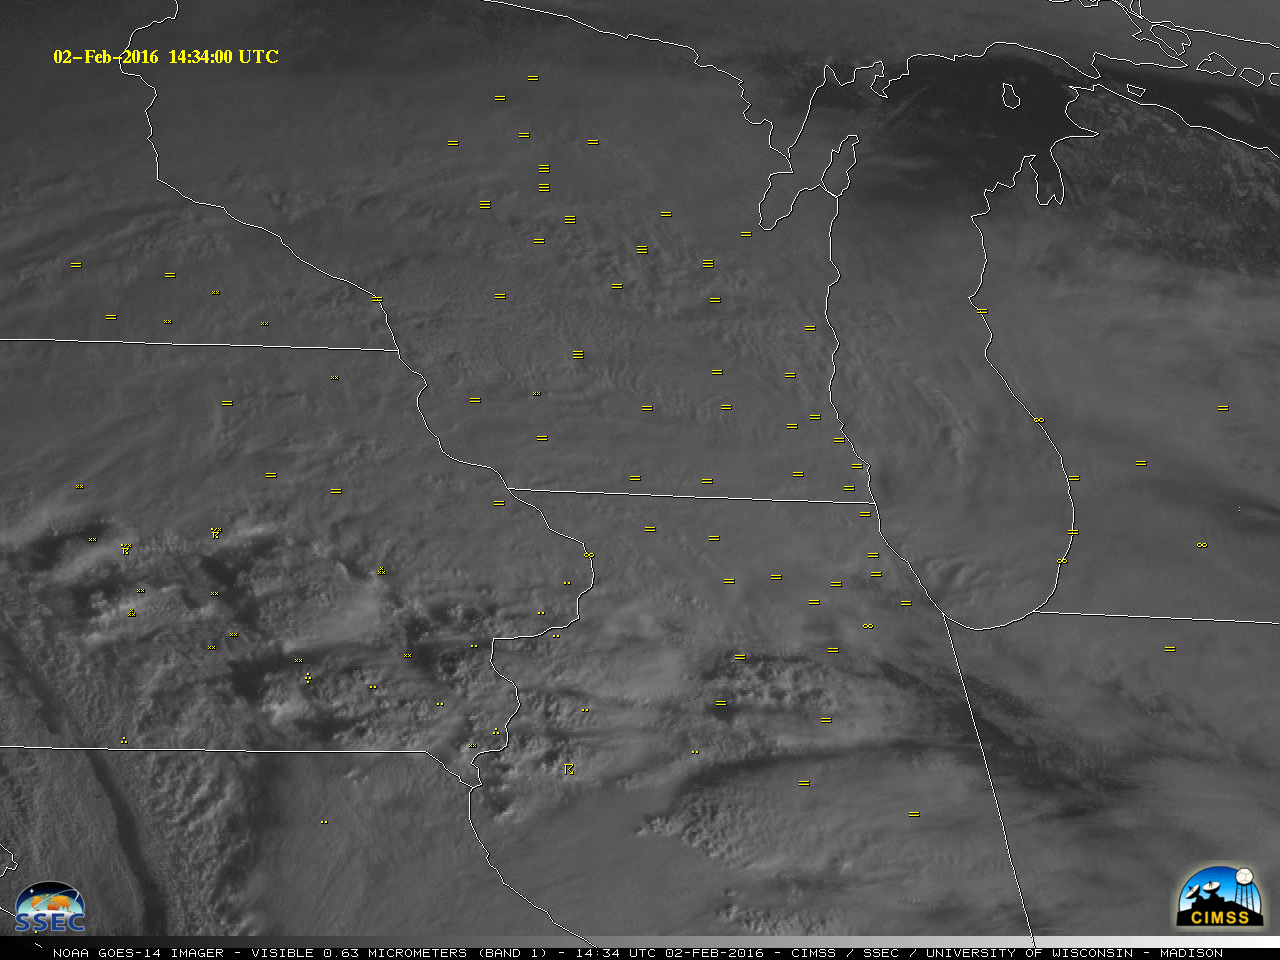 GOES-14 Visible (0.63 µm) images [click to play MP4 animation]